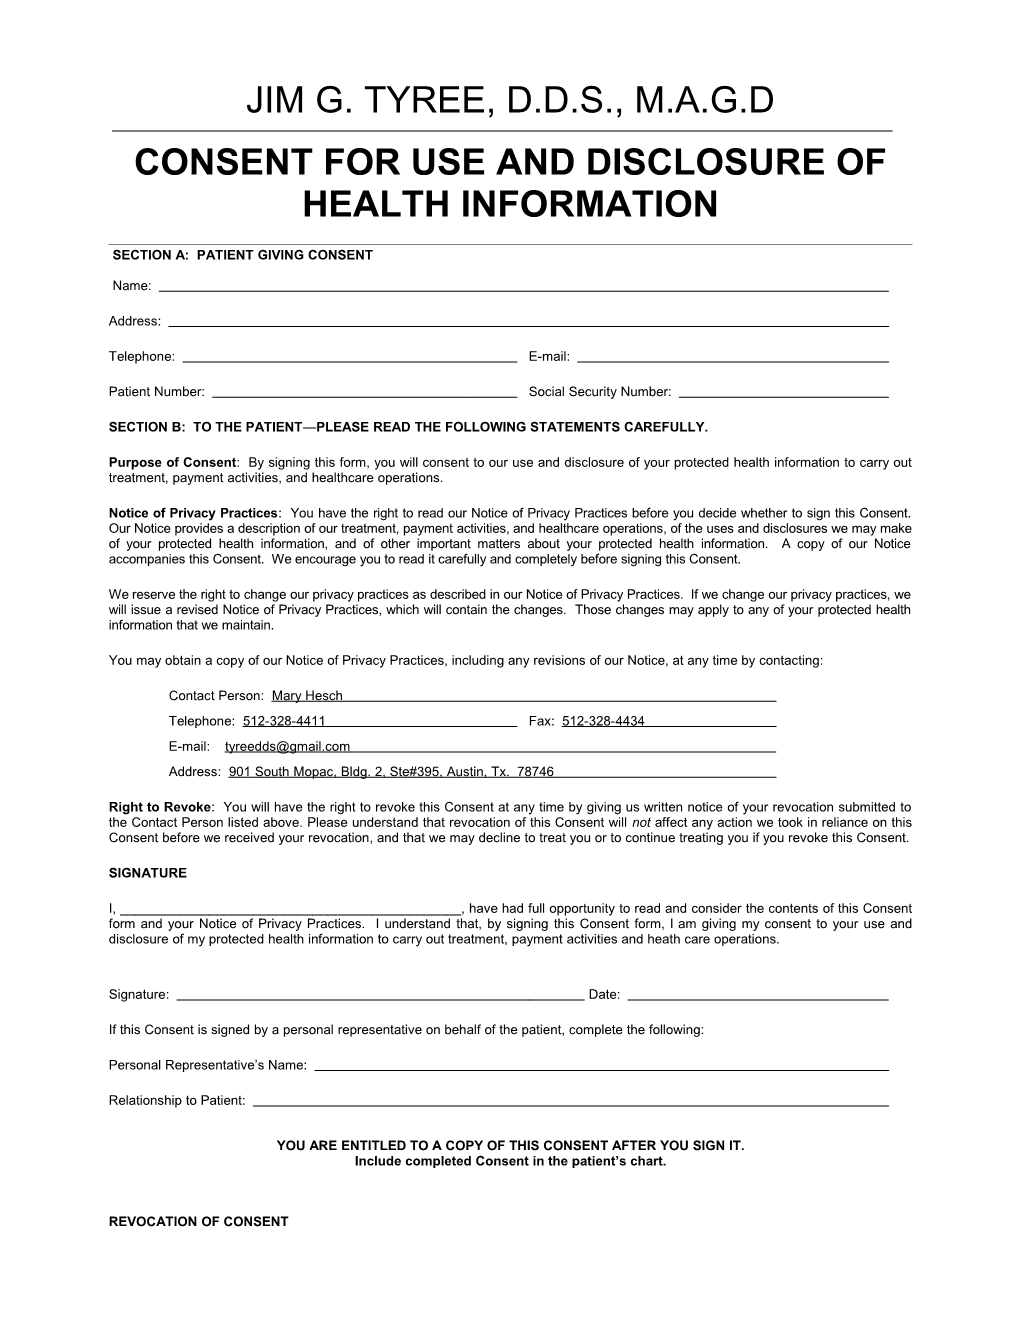 Form 01-Consent for Use and Disclosure of Health Information (01-COSNT;1)